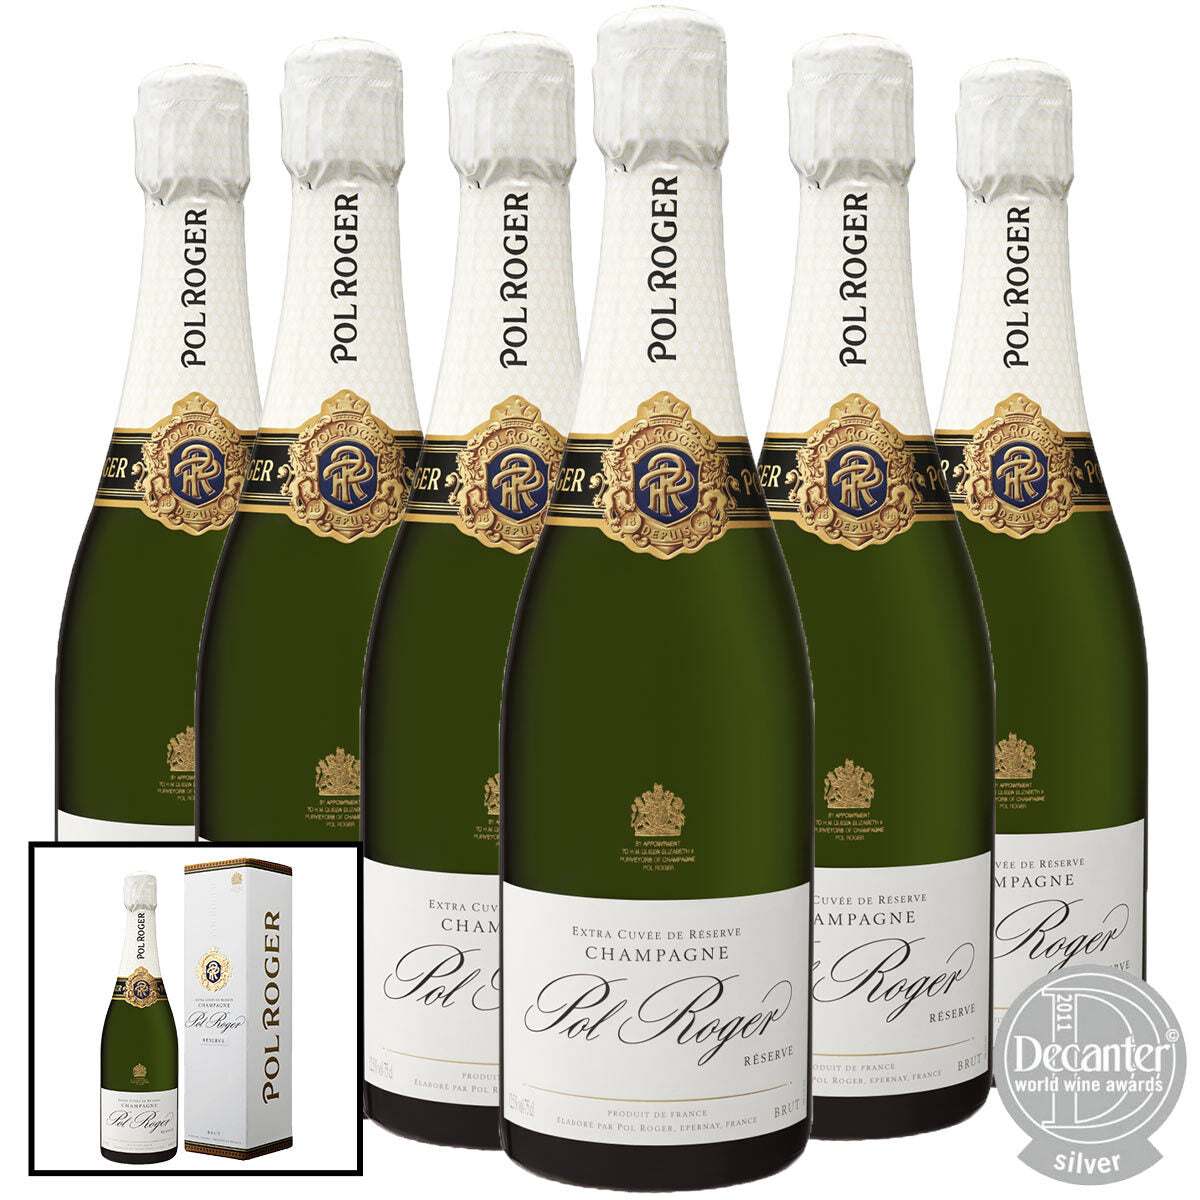 Pol Roger Brut Reserve NV Champagne, 6 x 75cl with Gift Box - McGrocer